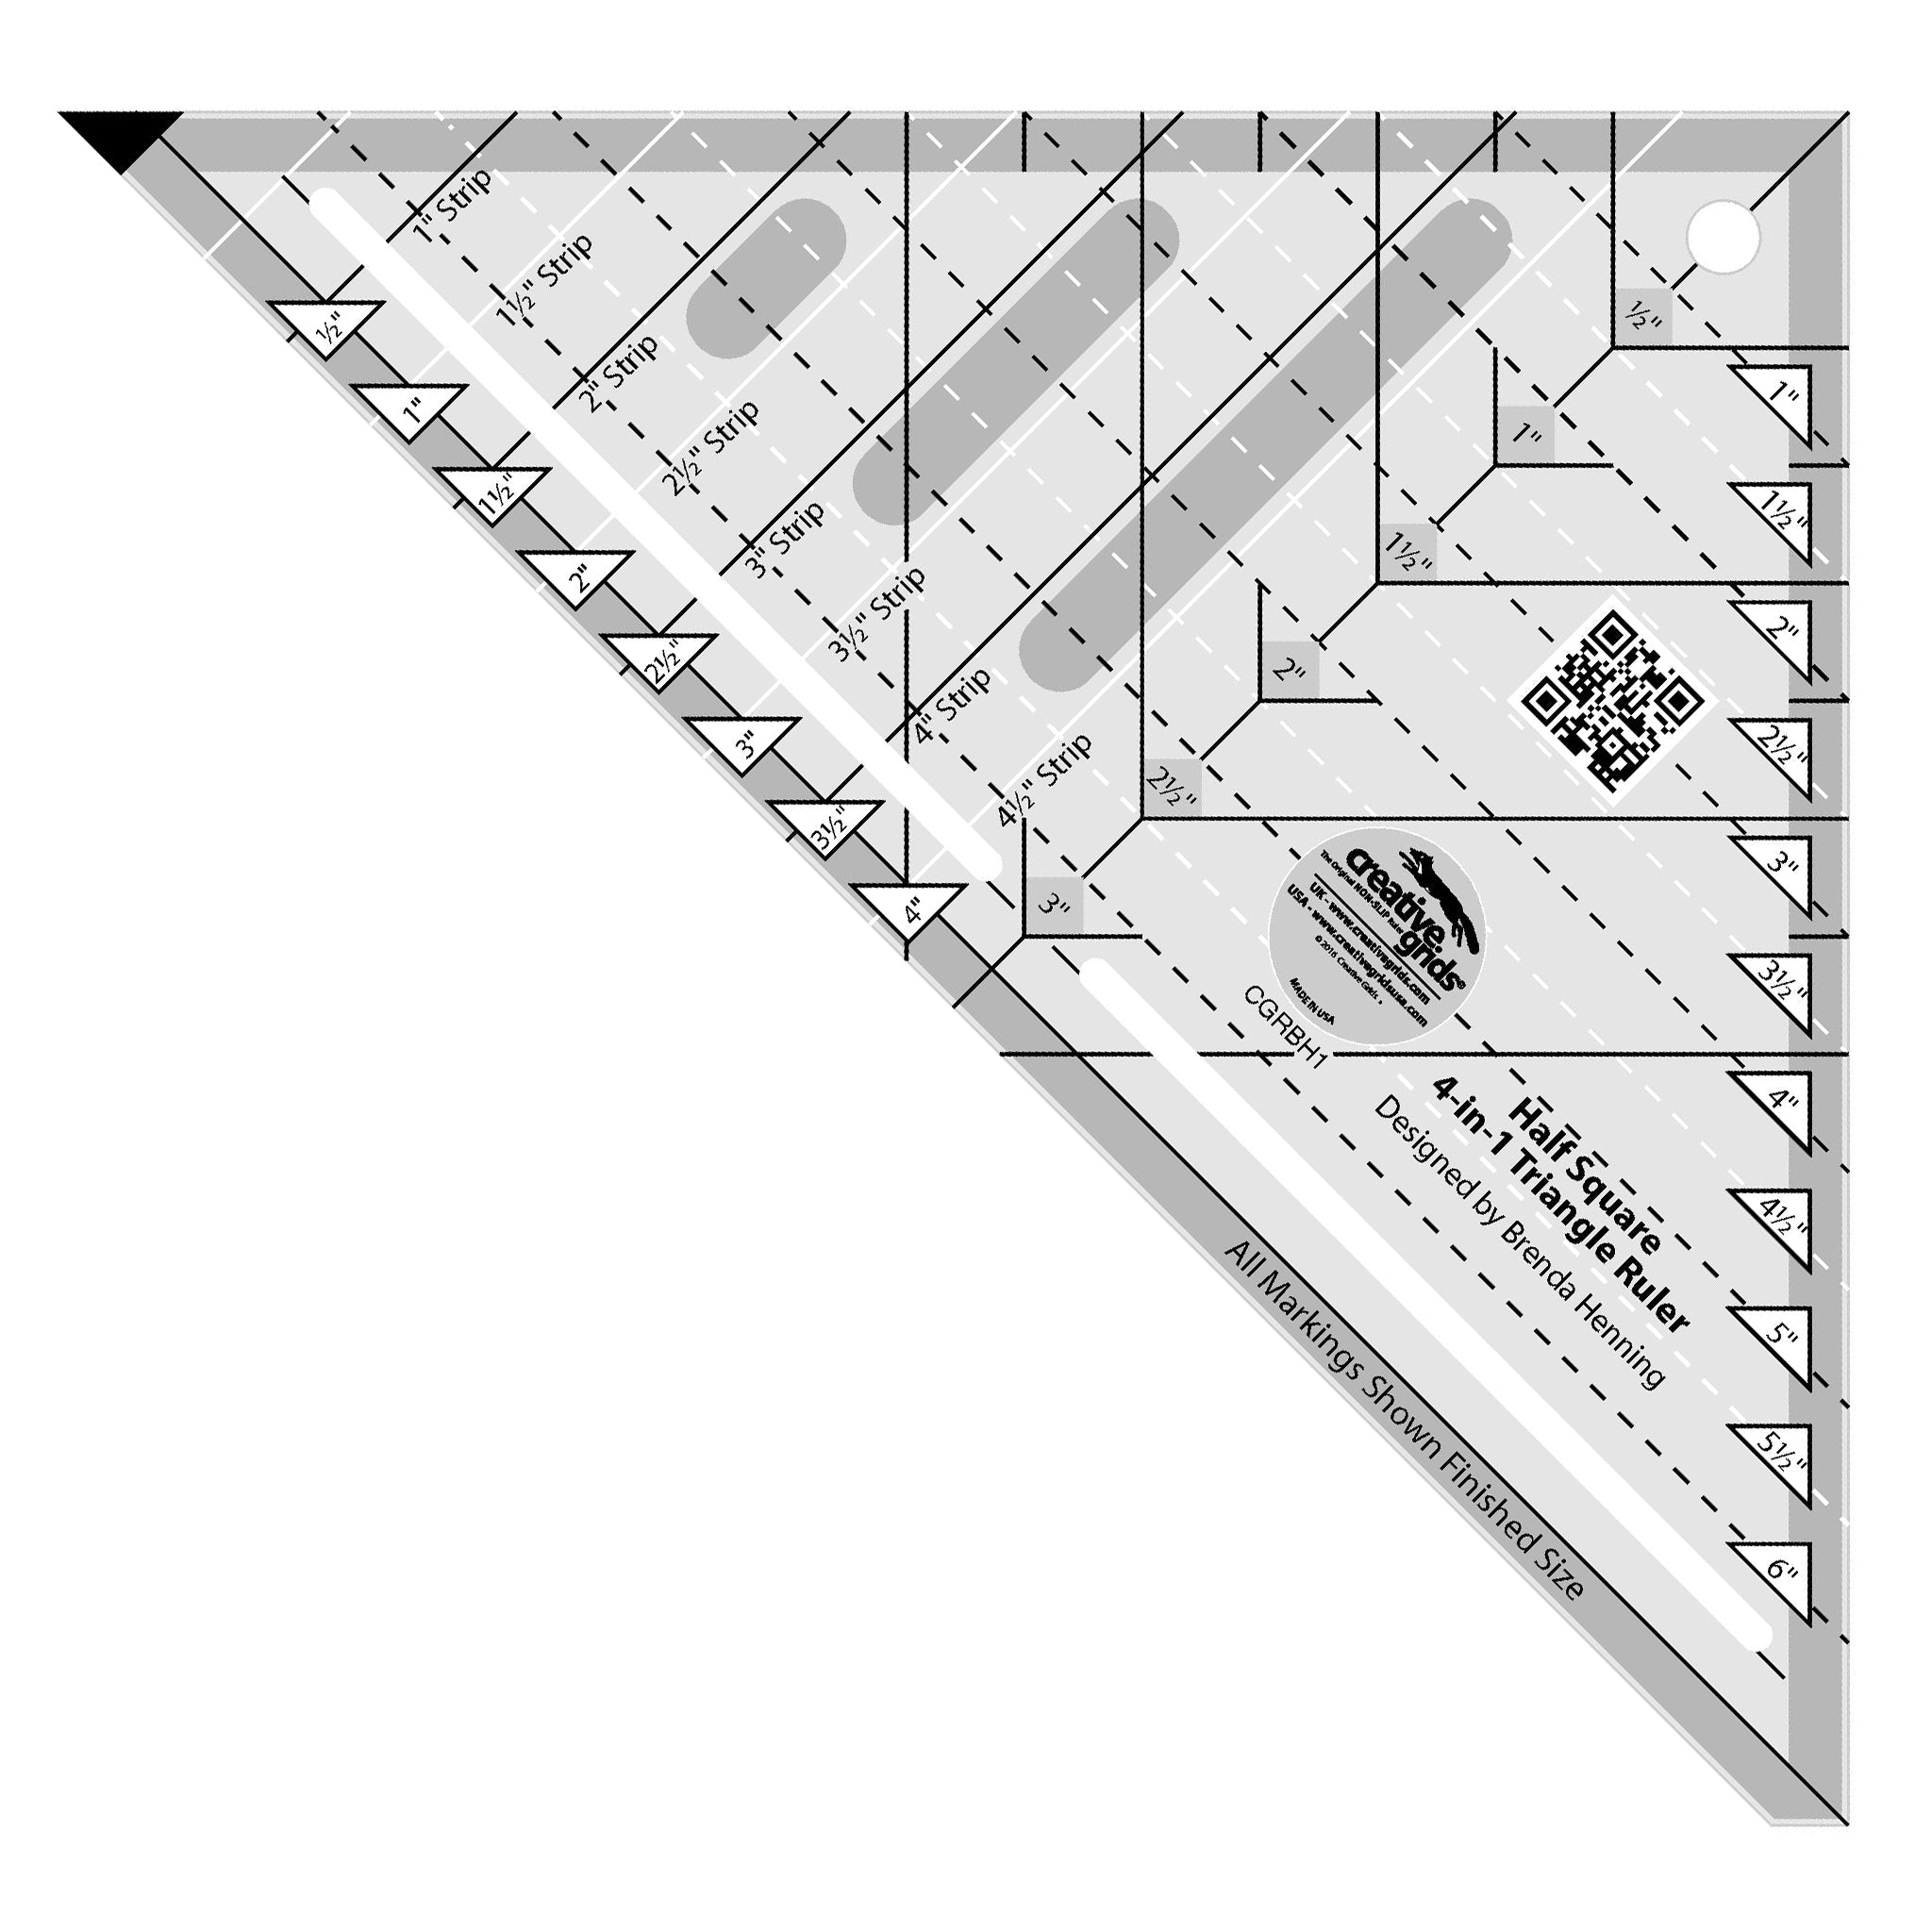 Creative Grids Half-Square 4-in-1 Triangle Quilt Ruler (CGRBH1)